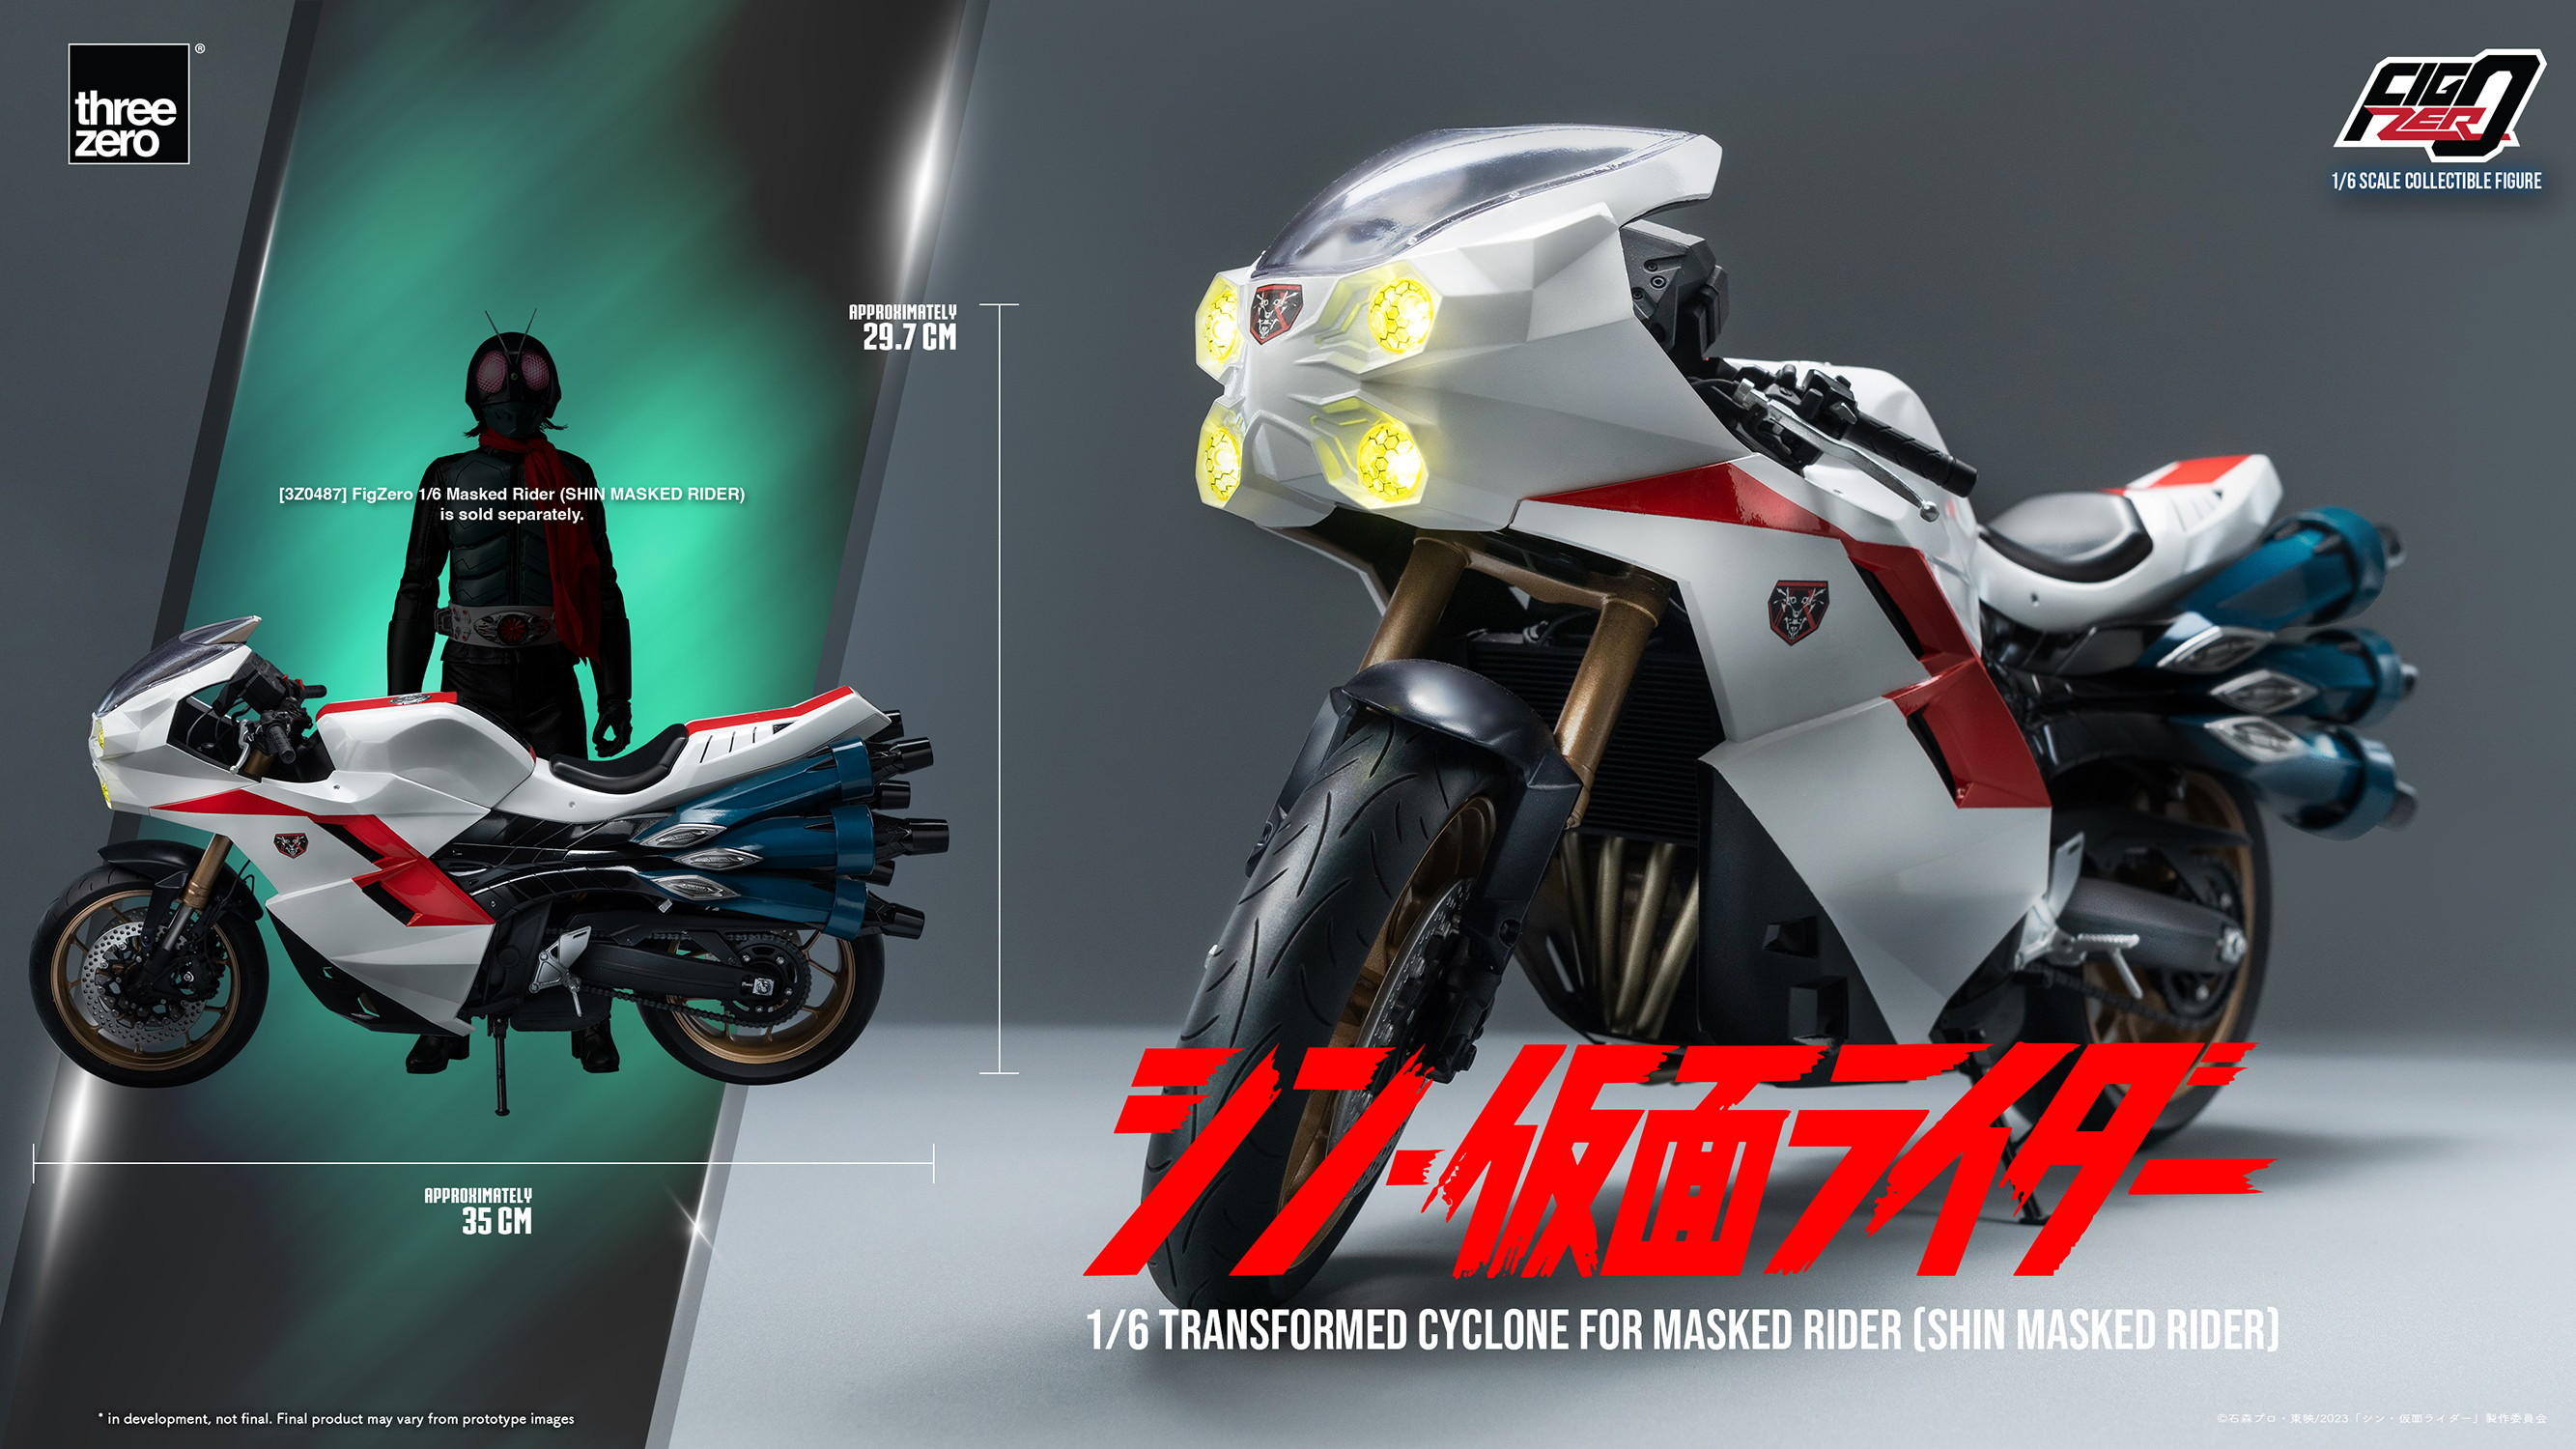 Transformed Cyclone for Masked Rider (Shin Masked Rider) (Prototype Shown) View 26